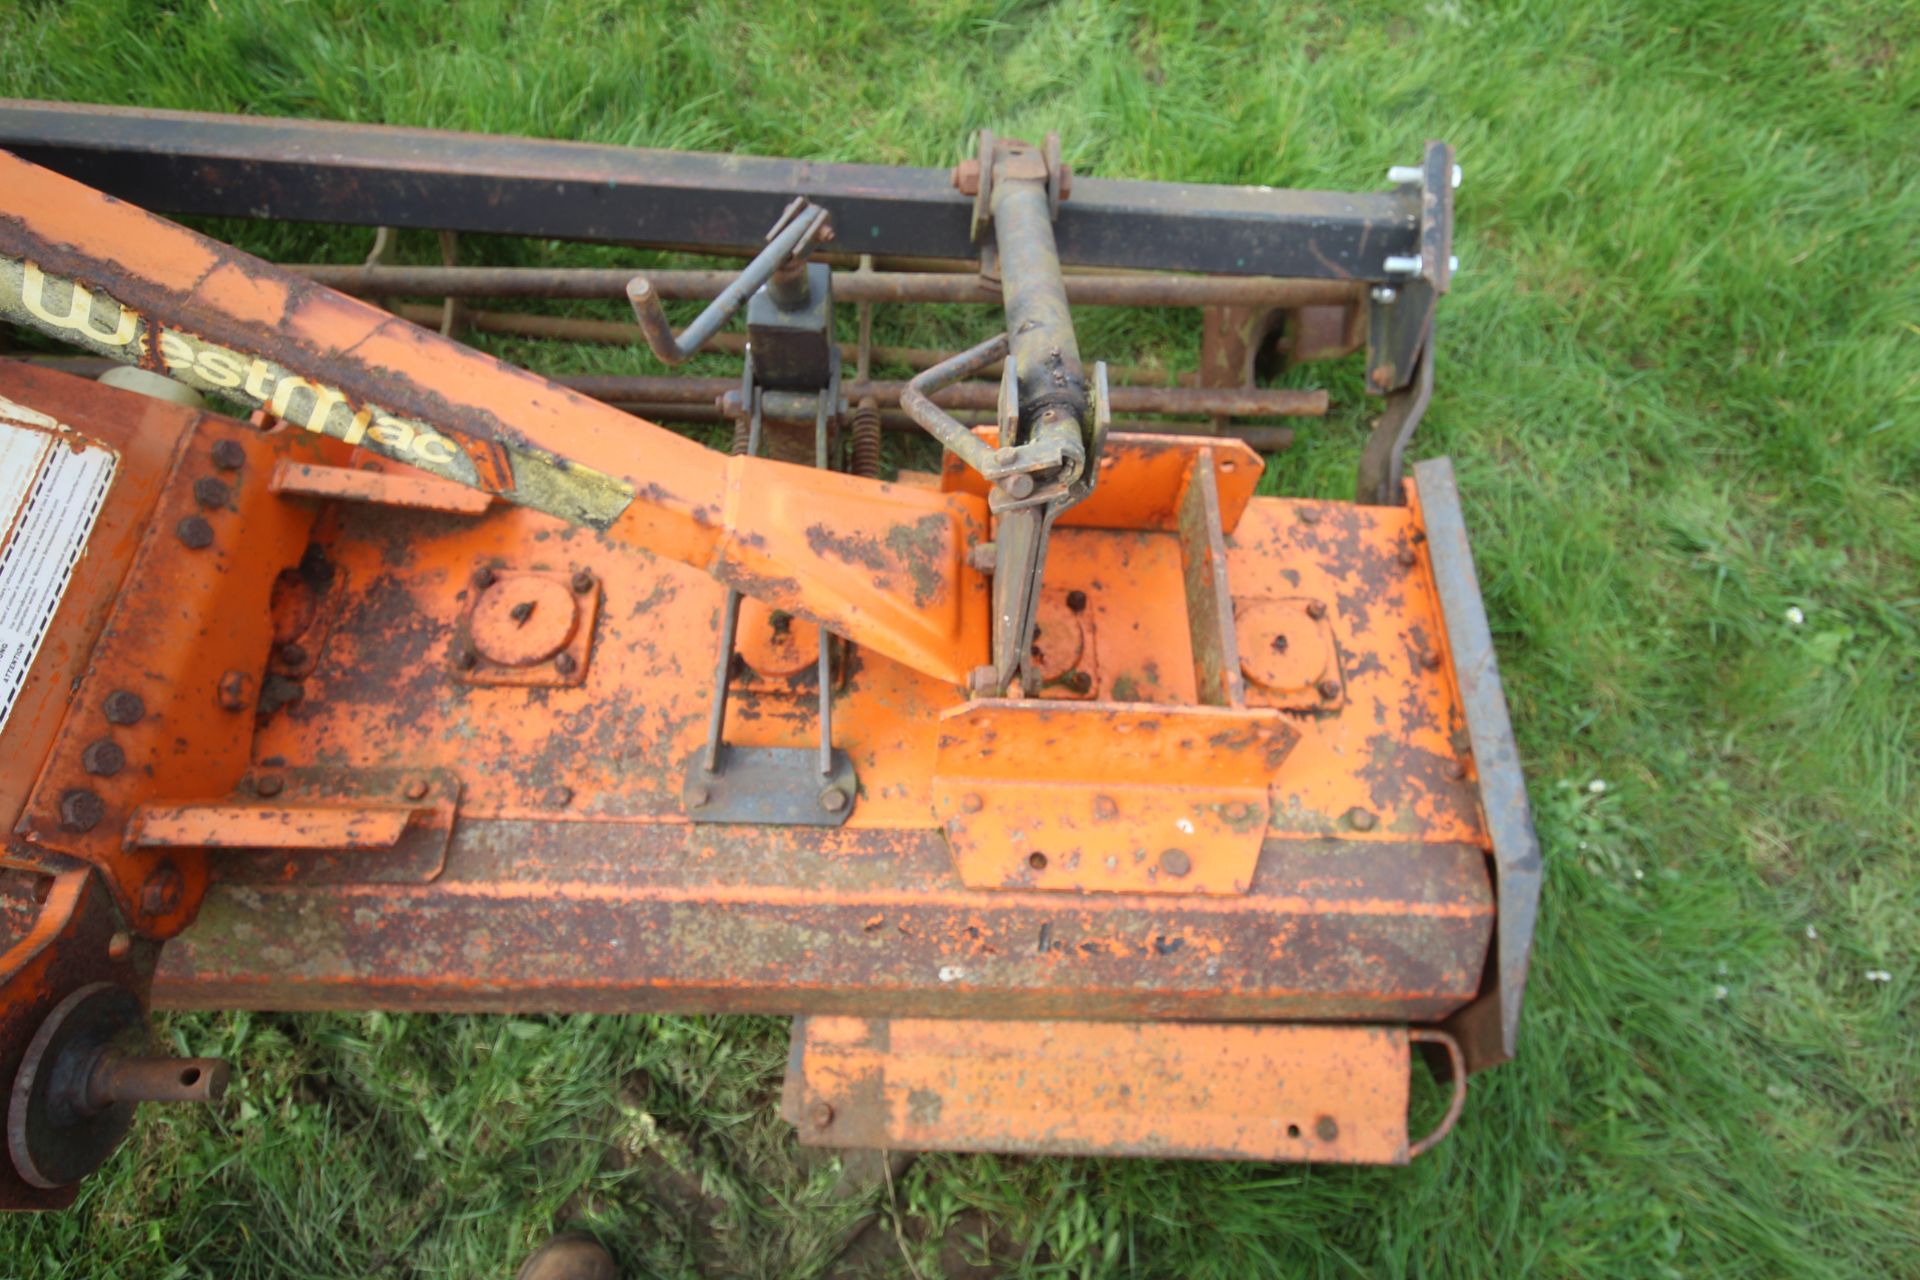 Westmac Pegararo 3m power harrow. Vendor reports owned since 2001 and used regularly. For sale due - Bild 4 aus 16